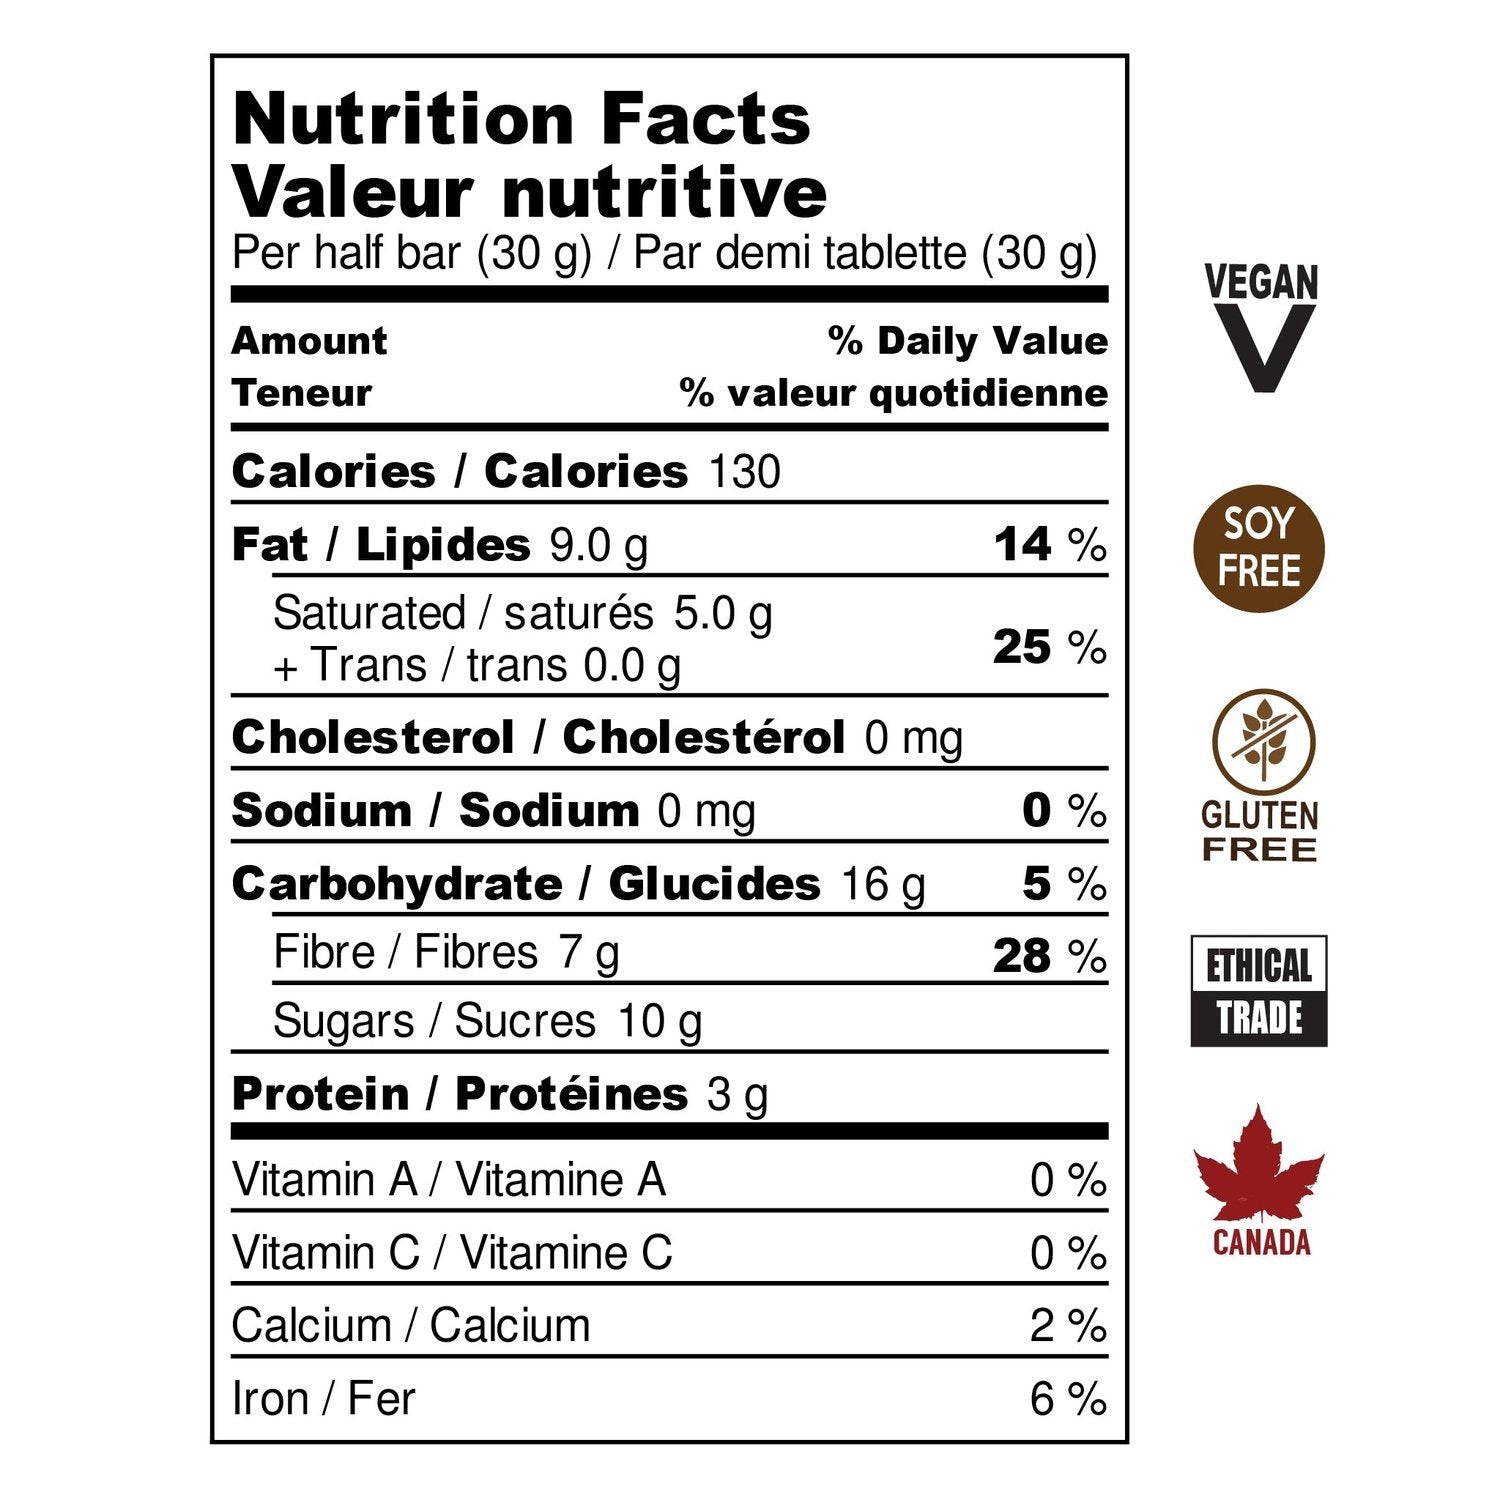 Nutrition Facts for Hispaniola 70% dark chocolate bar nutritional information. Vegan, Soy Free, Gluten Free, Ethical Trade, Made in Canada